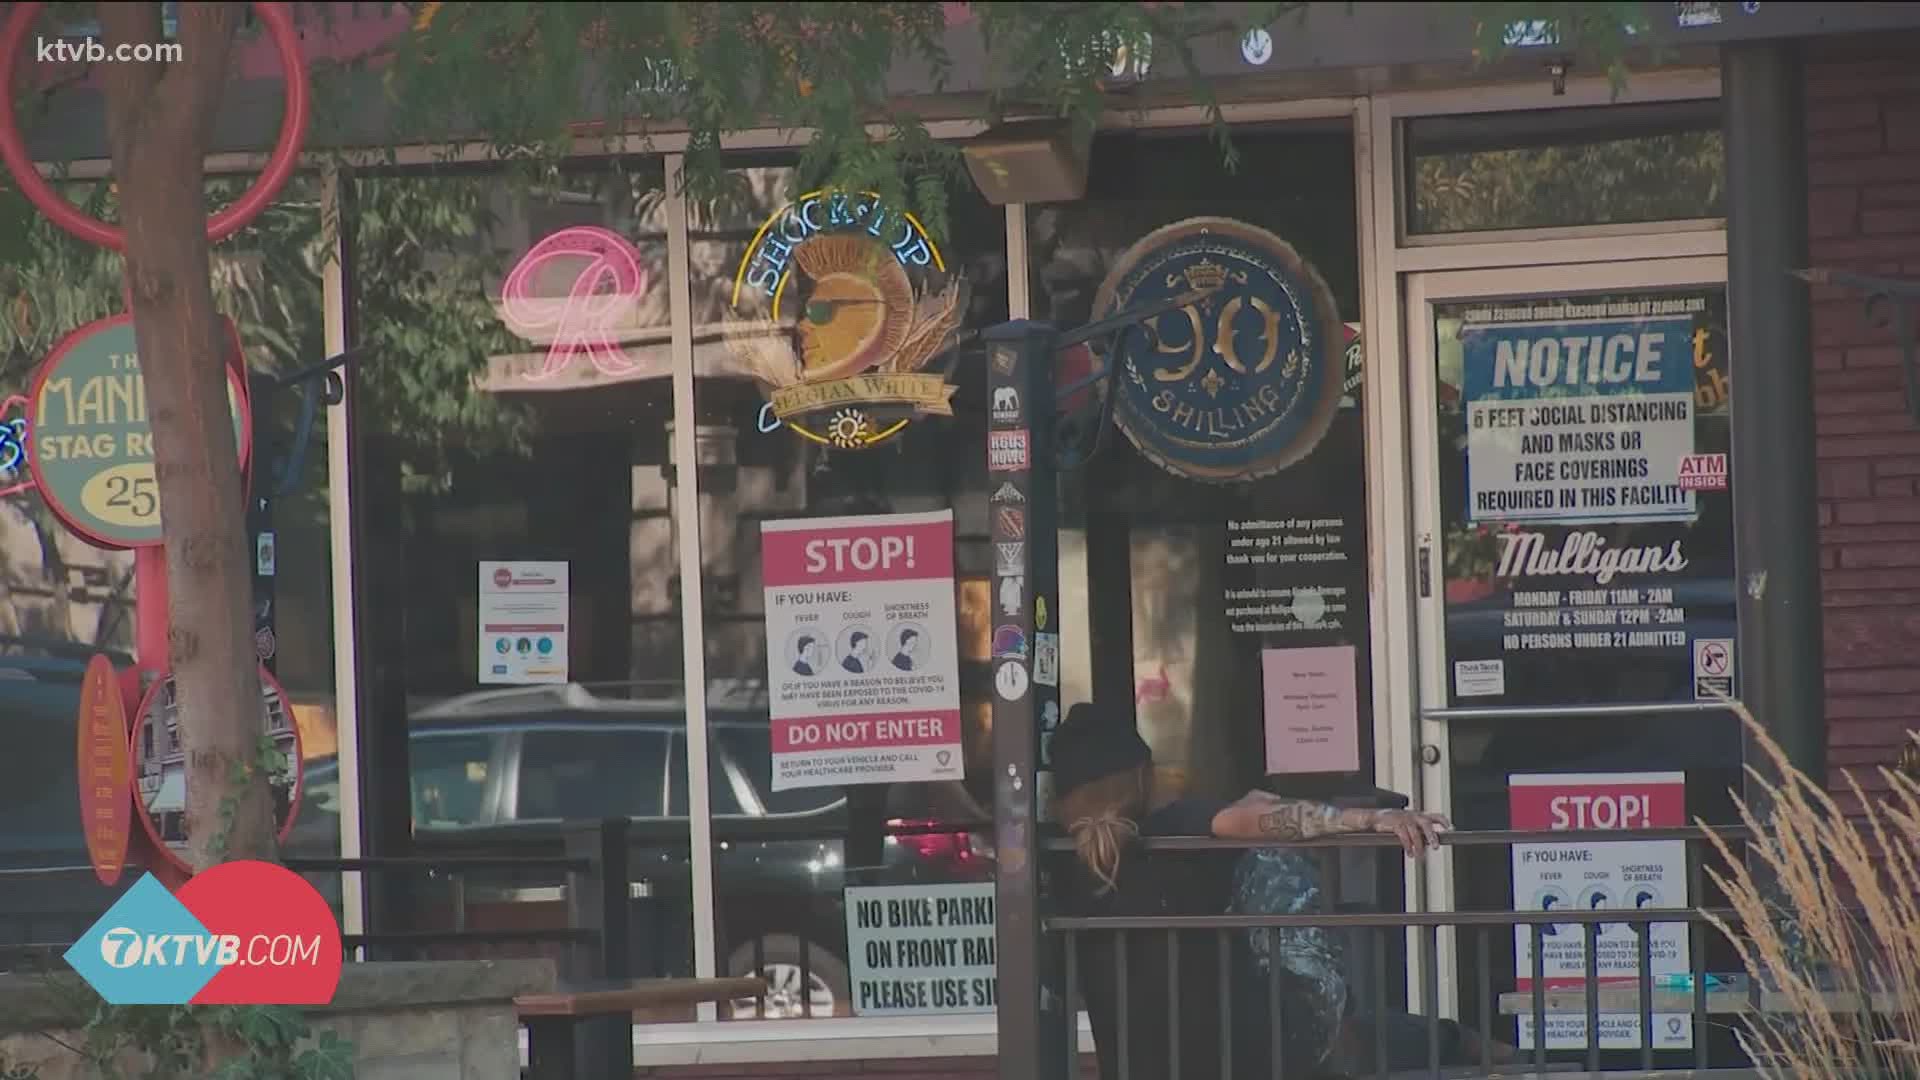 Central District Health said they plan to work with bar owners to develop a plan, but only after the county is moved from 'red' to 'yellow' categories.